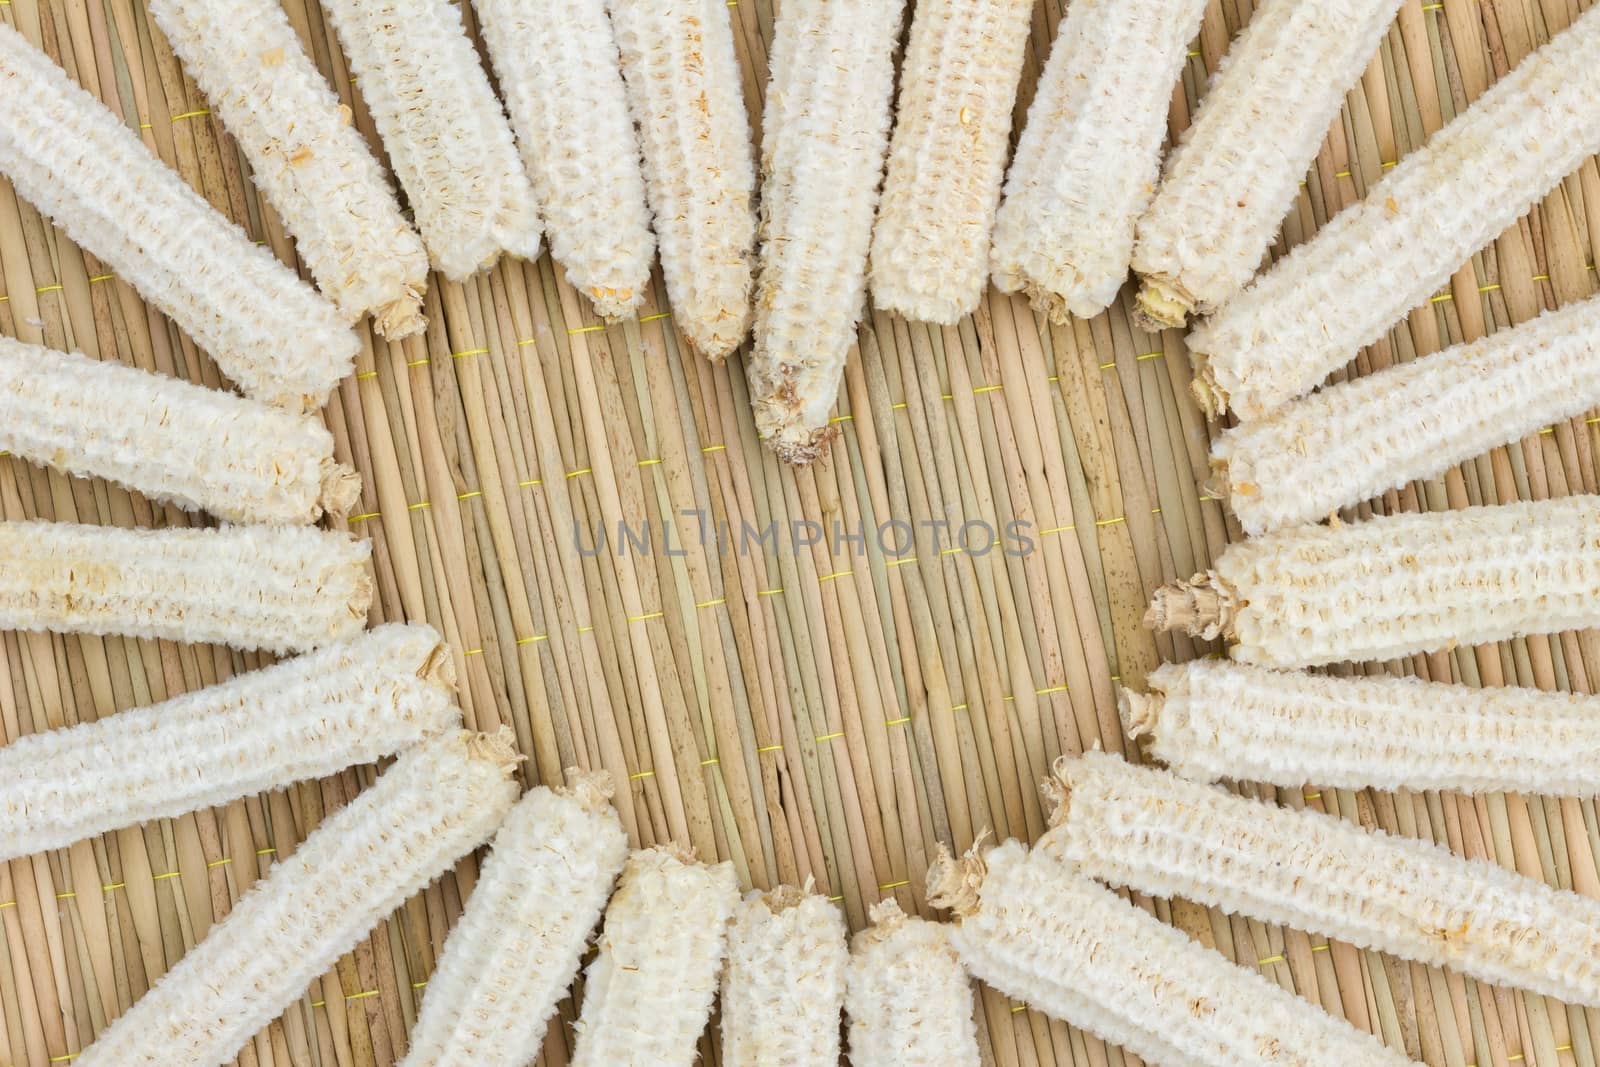 heart shape made of corn cobs by a3701027